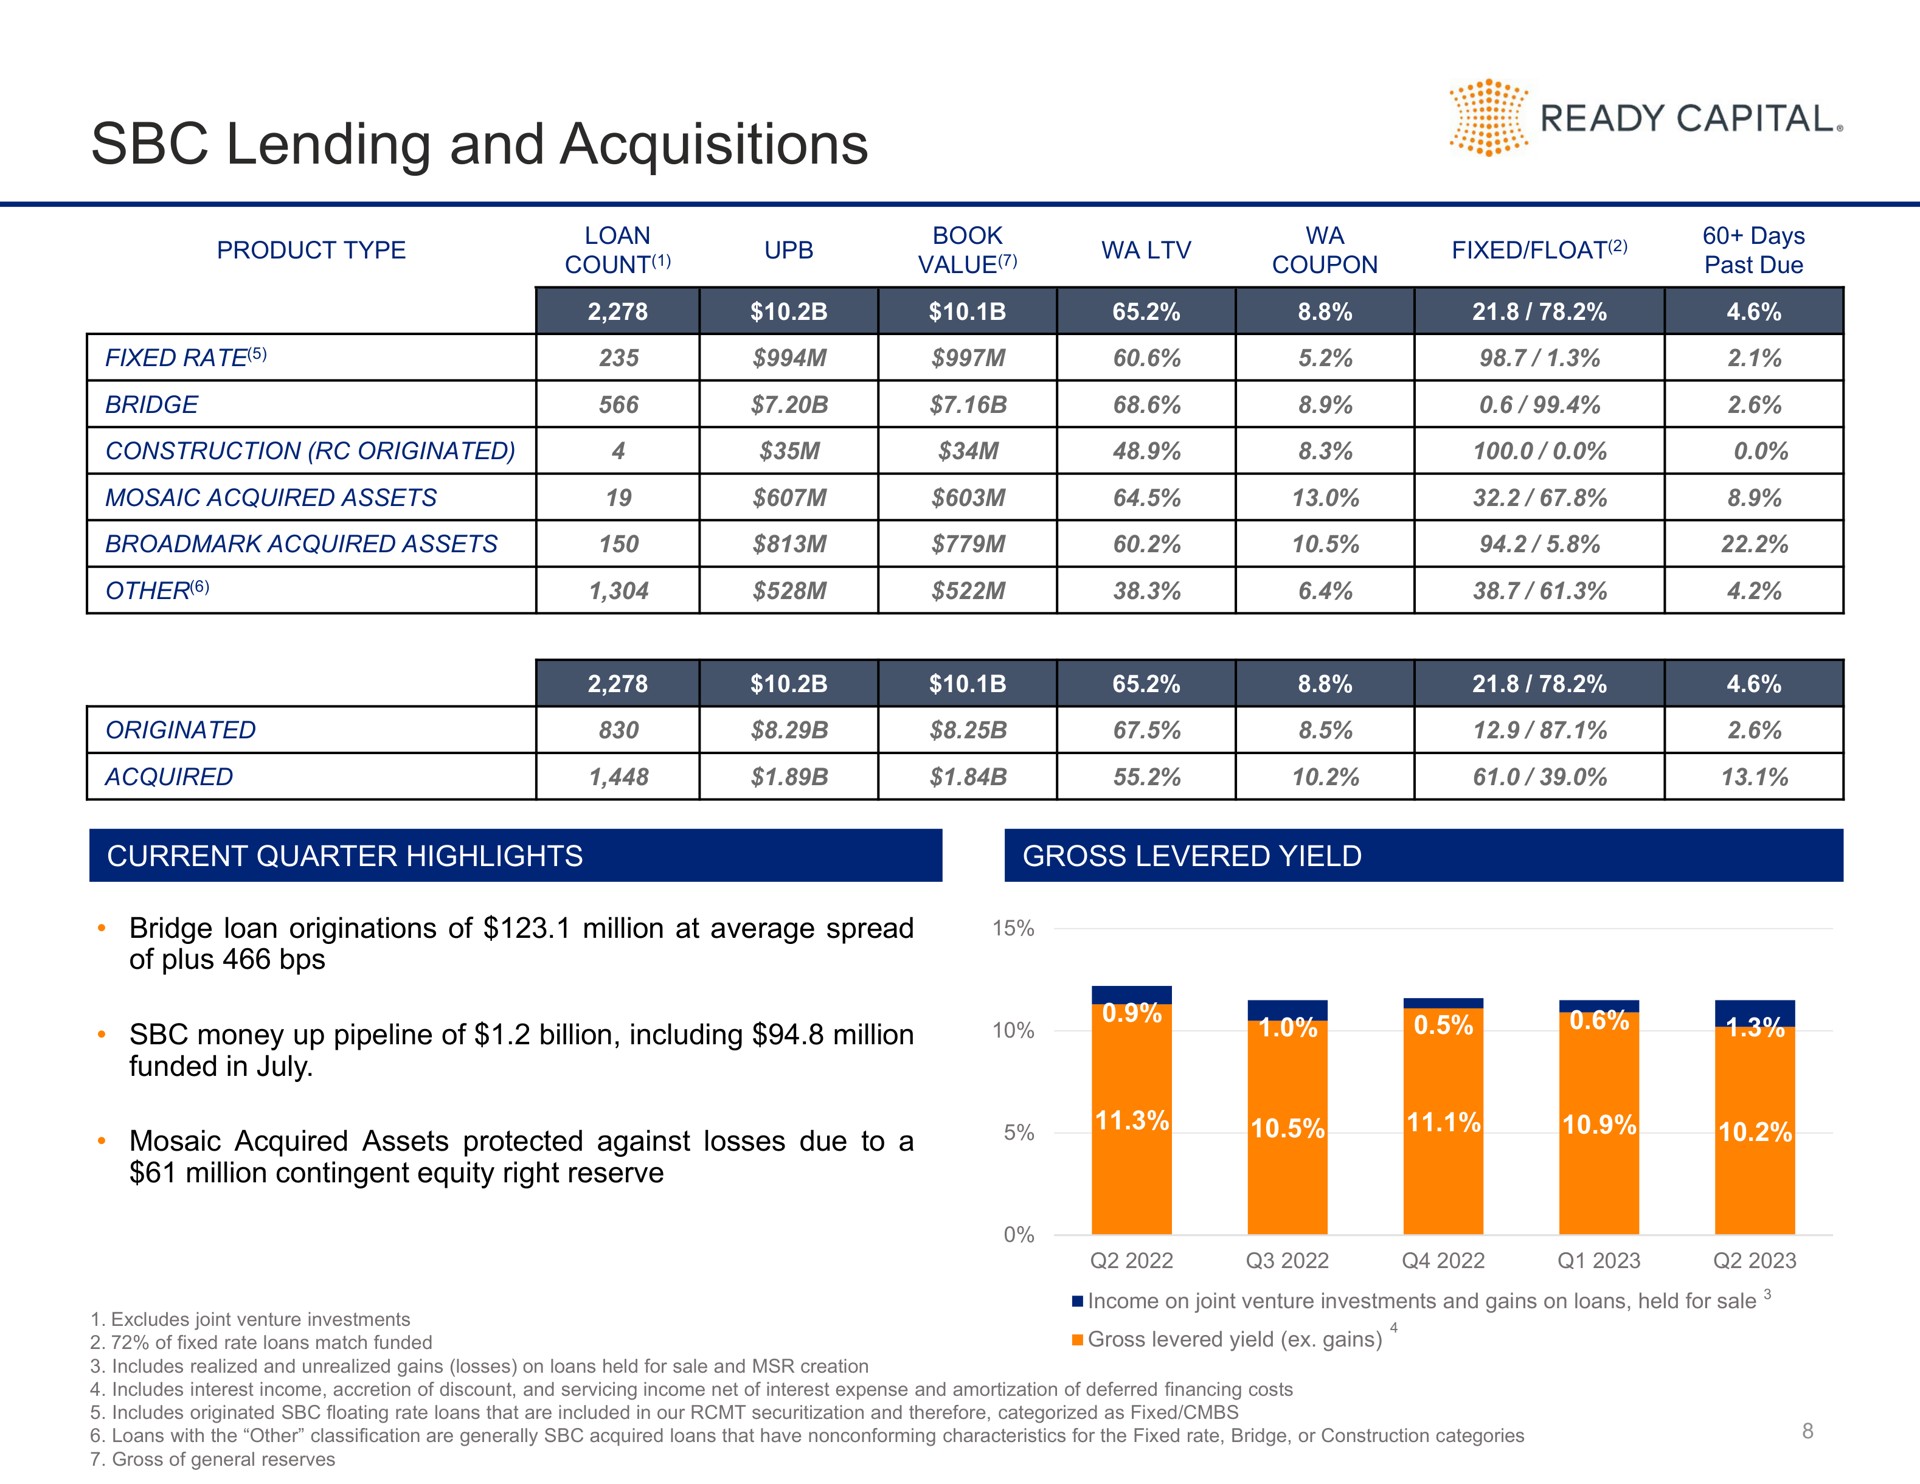 lending and acquisitions ready capital sas seam | Ready Capital